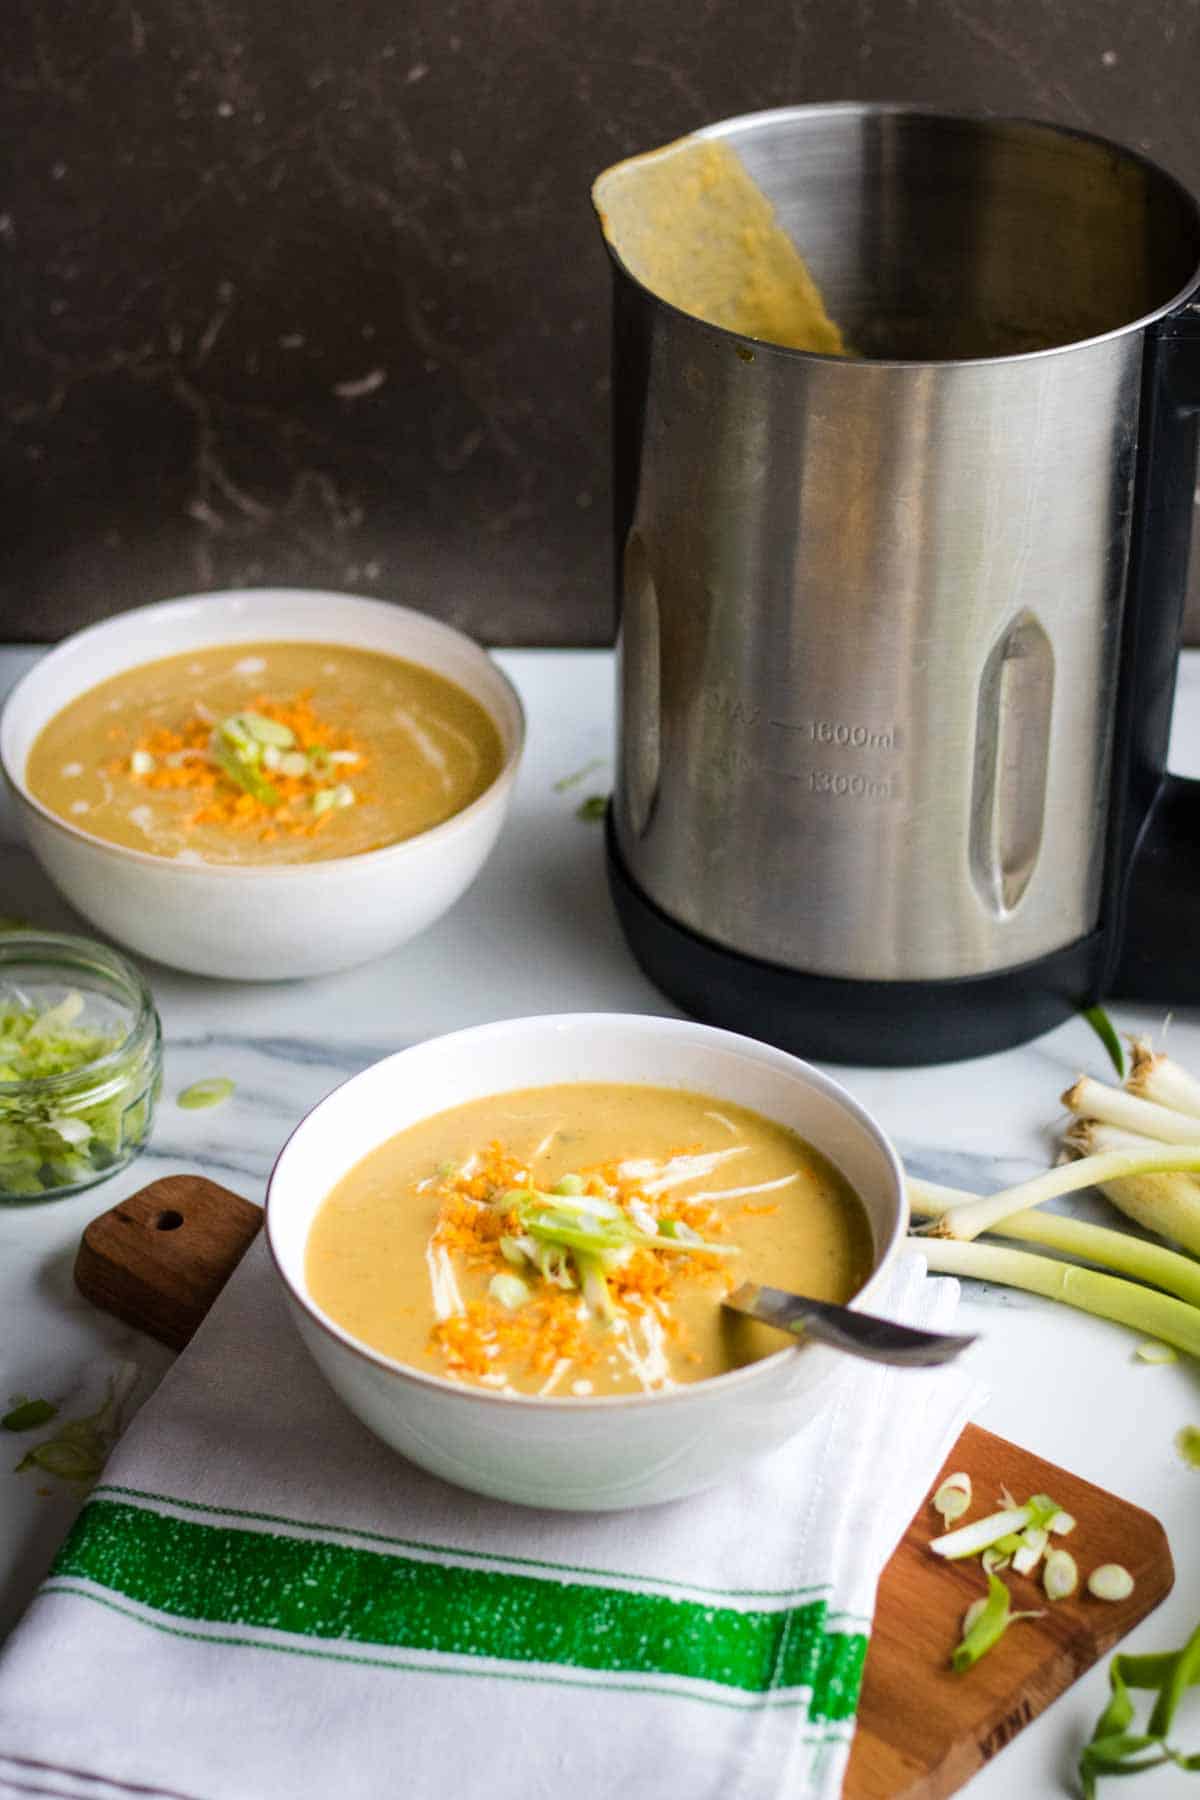 https://tastefullyvikkie.com/wp-content/uploads/2021/03/cheese-and-spring-onions-soup-52.jpg